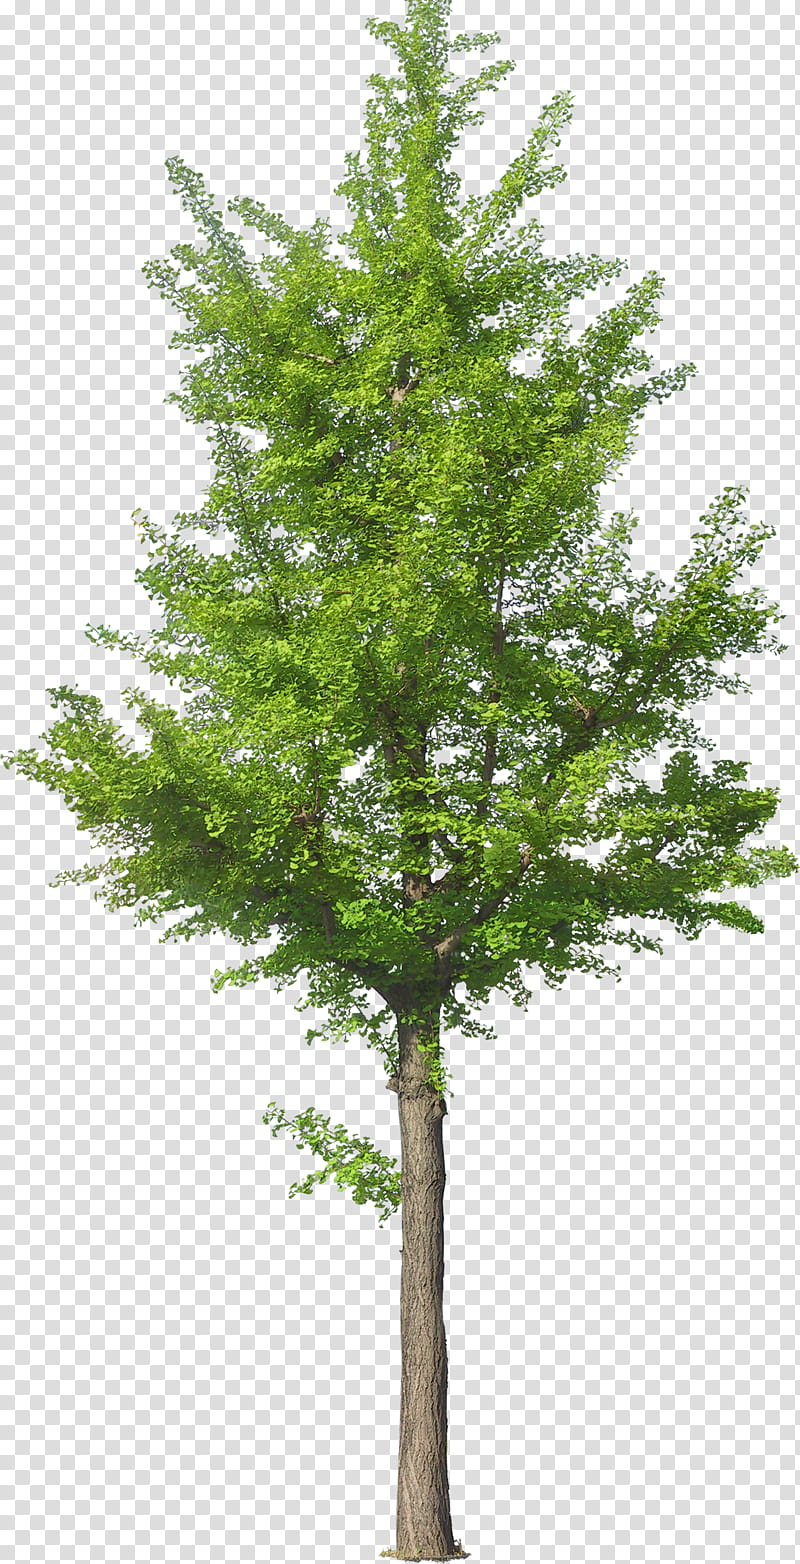 Family Tree, Trees And Shrubs, Rendering, Adobe shop Elements, Plants, Drawing, Pine, Woody Plant transparent background PNG clipart